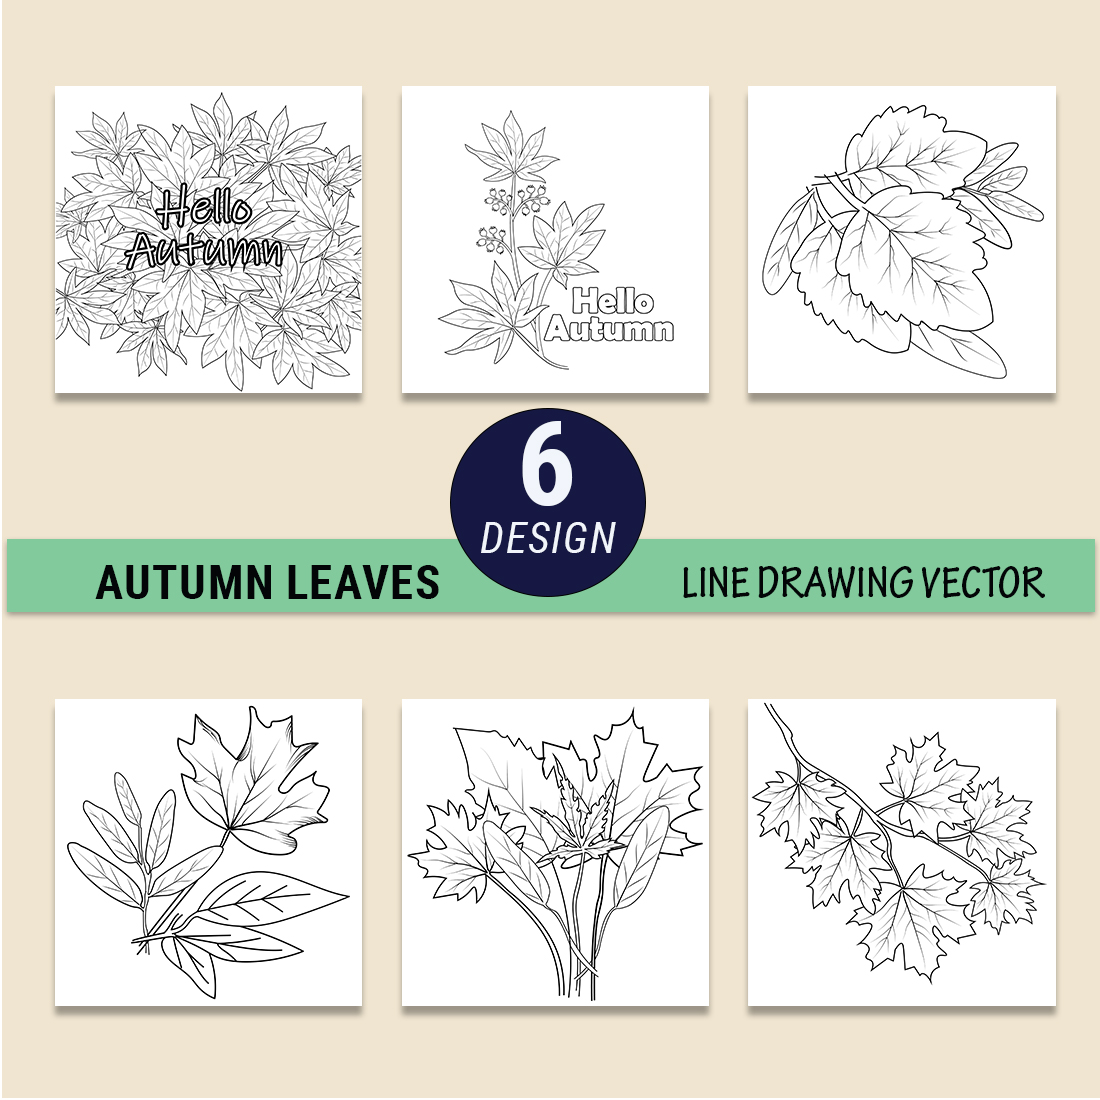 Autumn harvest vegetable pumpkin Autumn Fall season coloring illustration pages, Maple ornate leaves in black isolated on white background preview image.